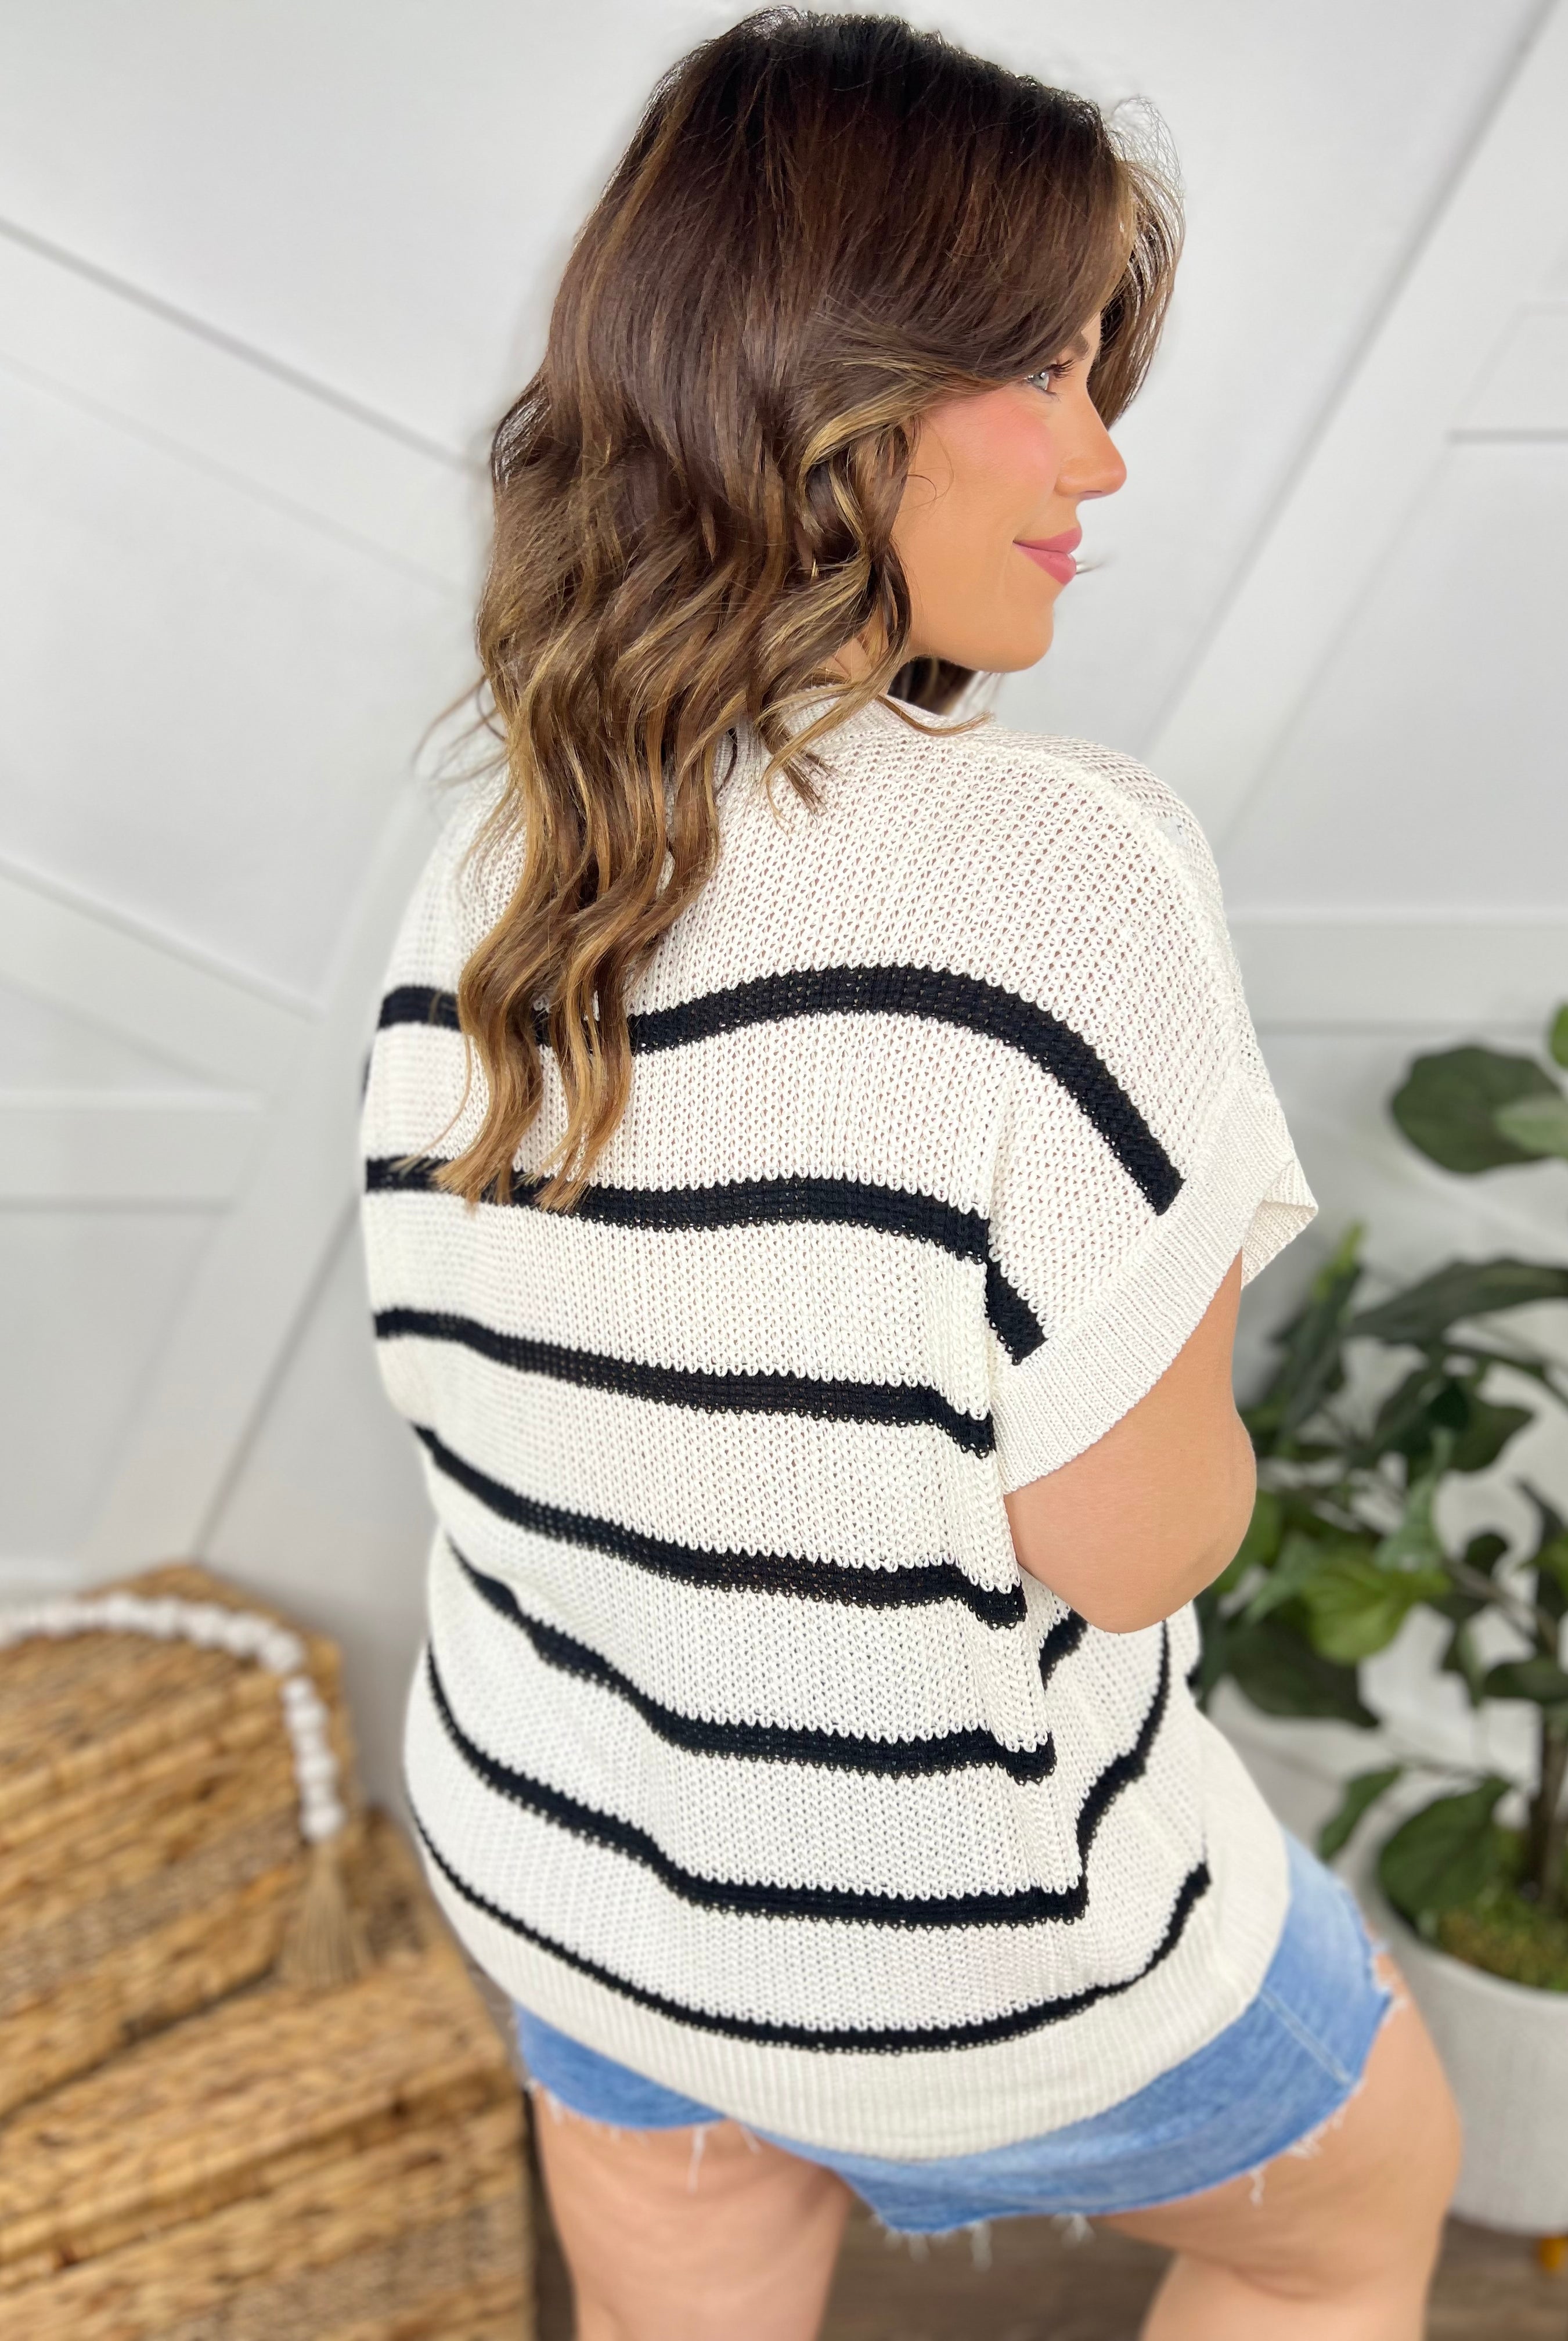 Vacay Mode Sweater Top-110 Short Sleeve Top-Bibi-Heathered Boho Boutique, Women's Fashion and Accessories in Palmetto, FL